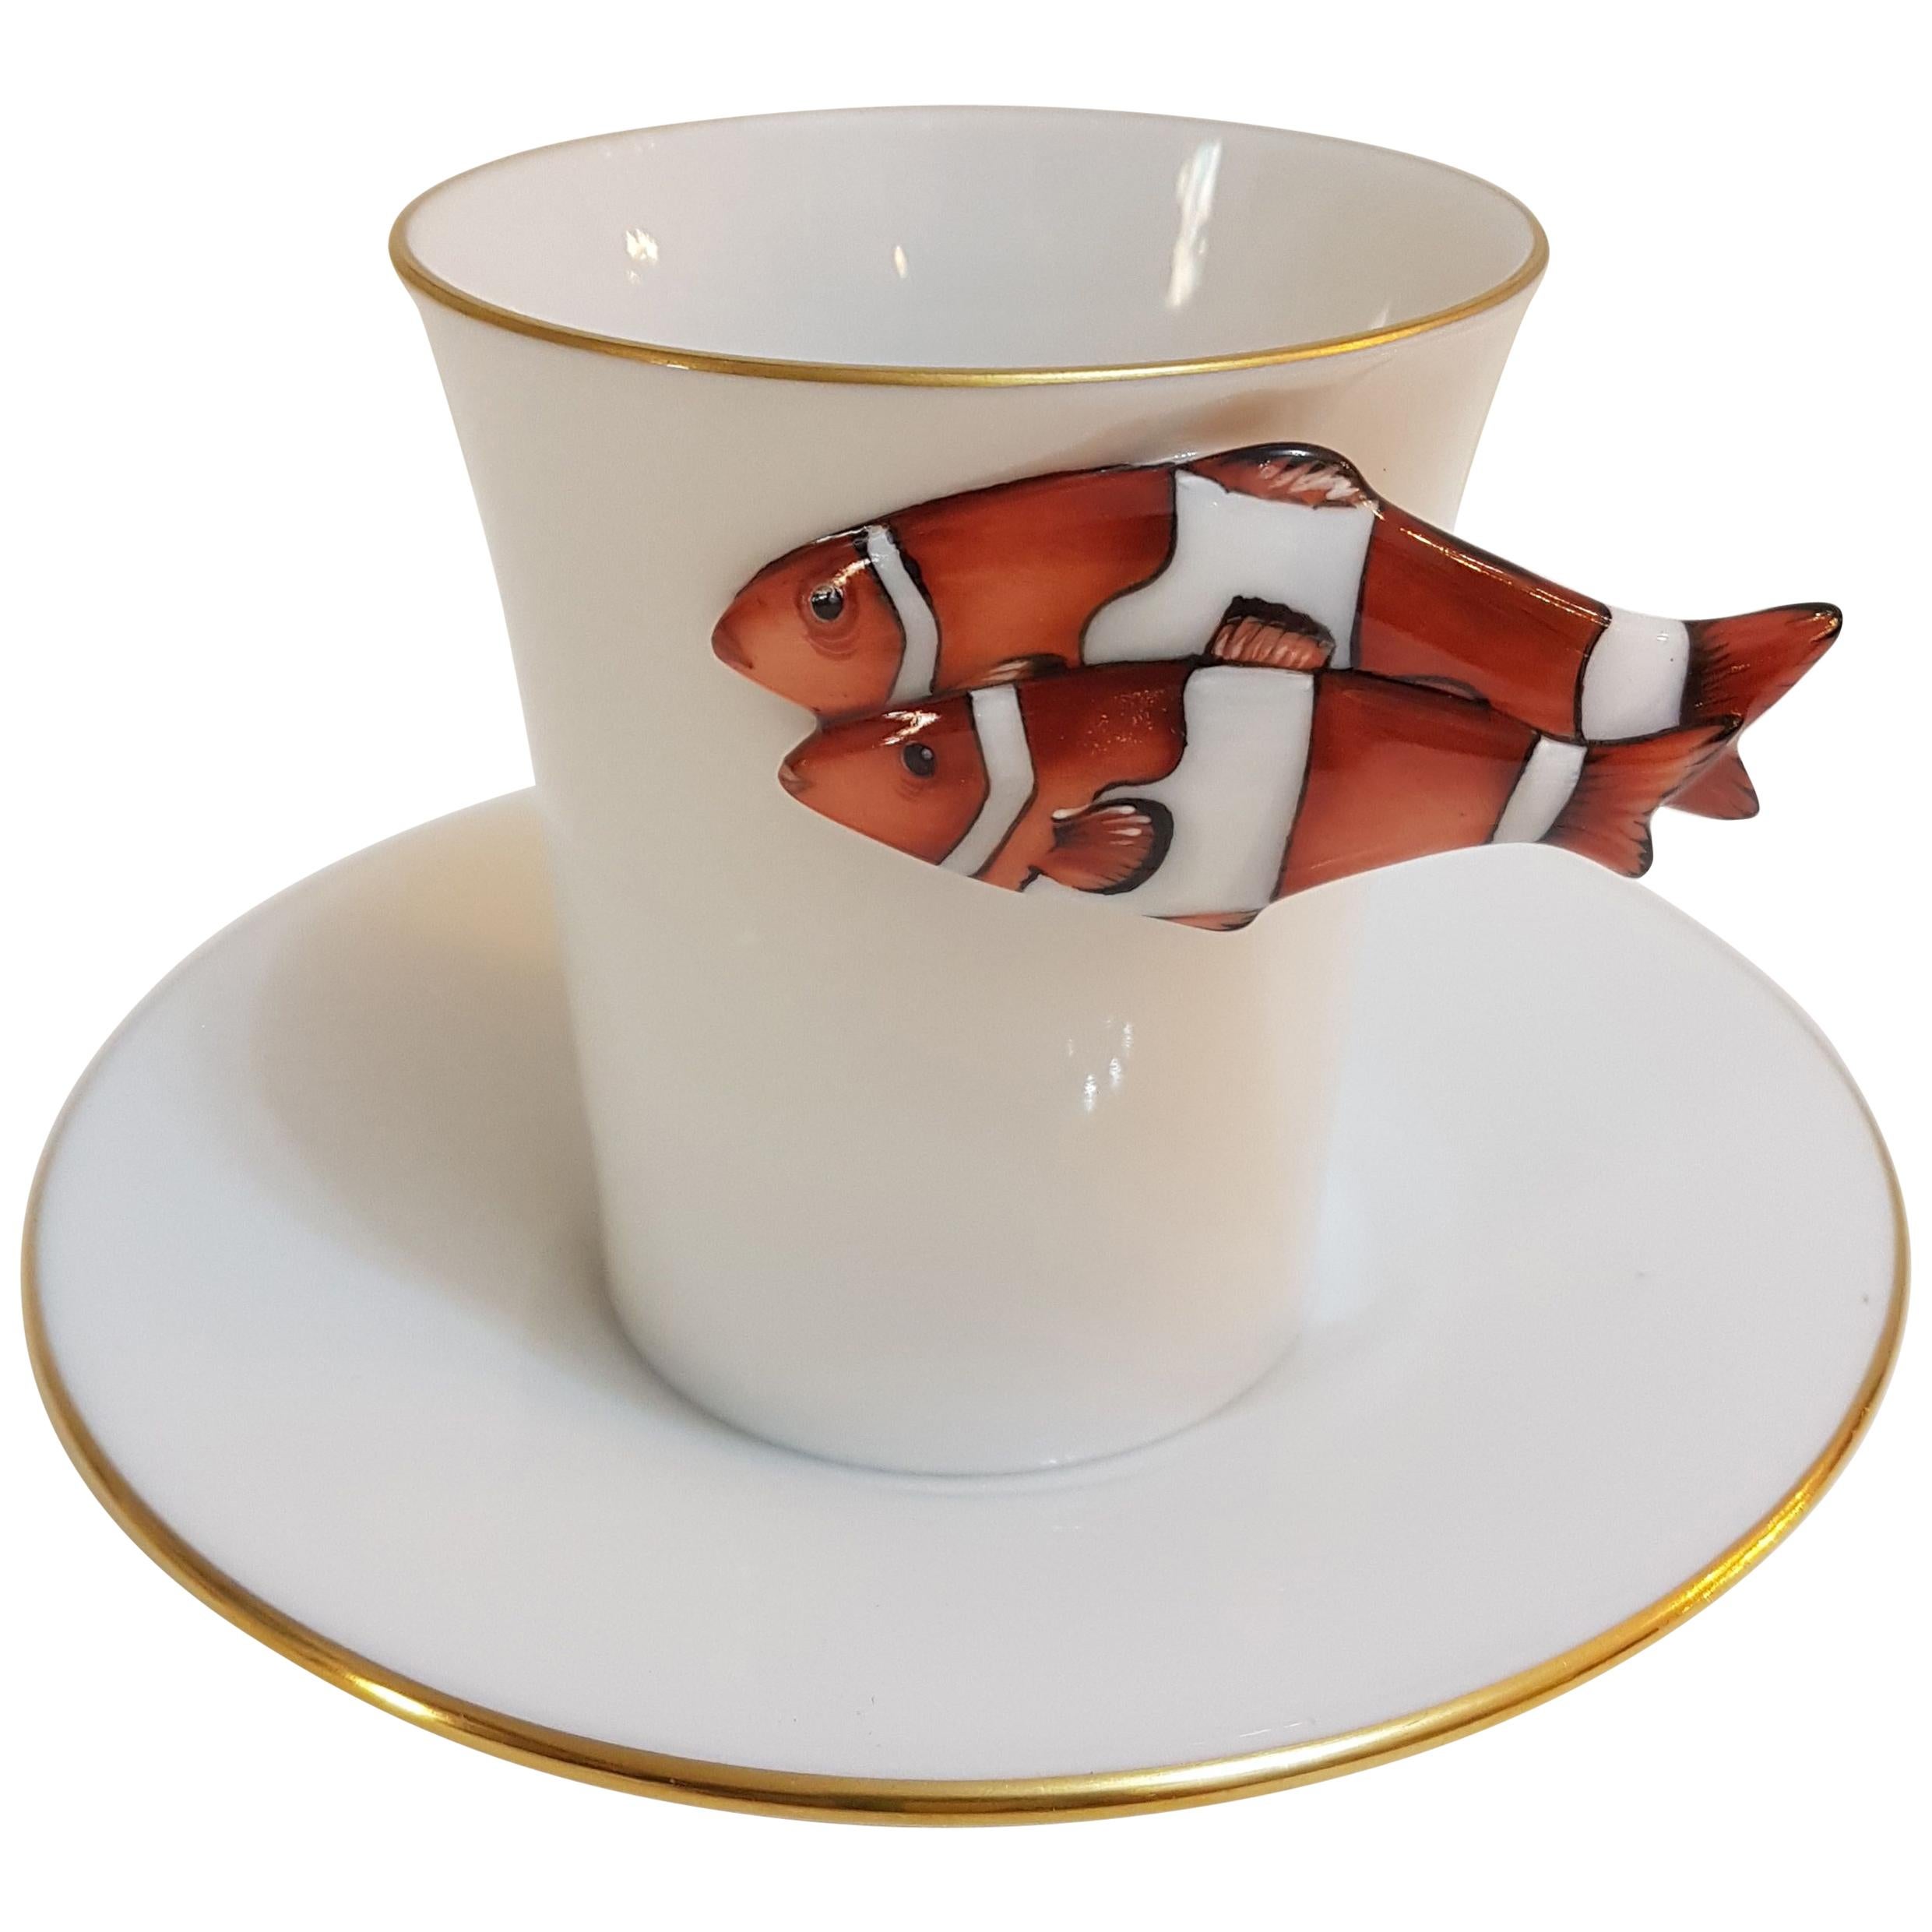 Herend "Clownfish" Hand Painted Hungarian Porcelain Coffee Cup and Saucer